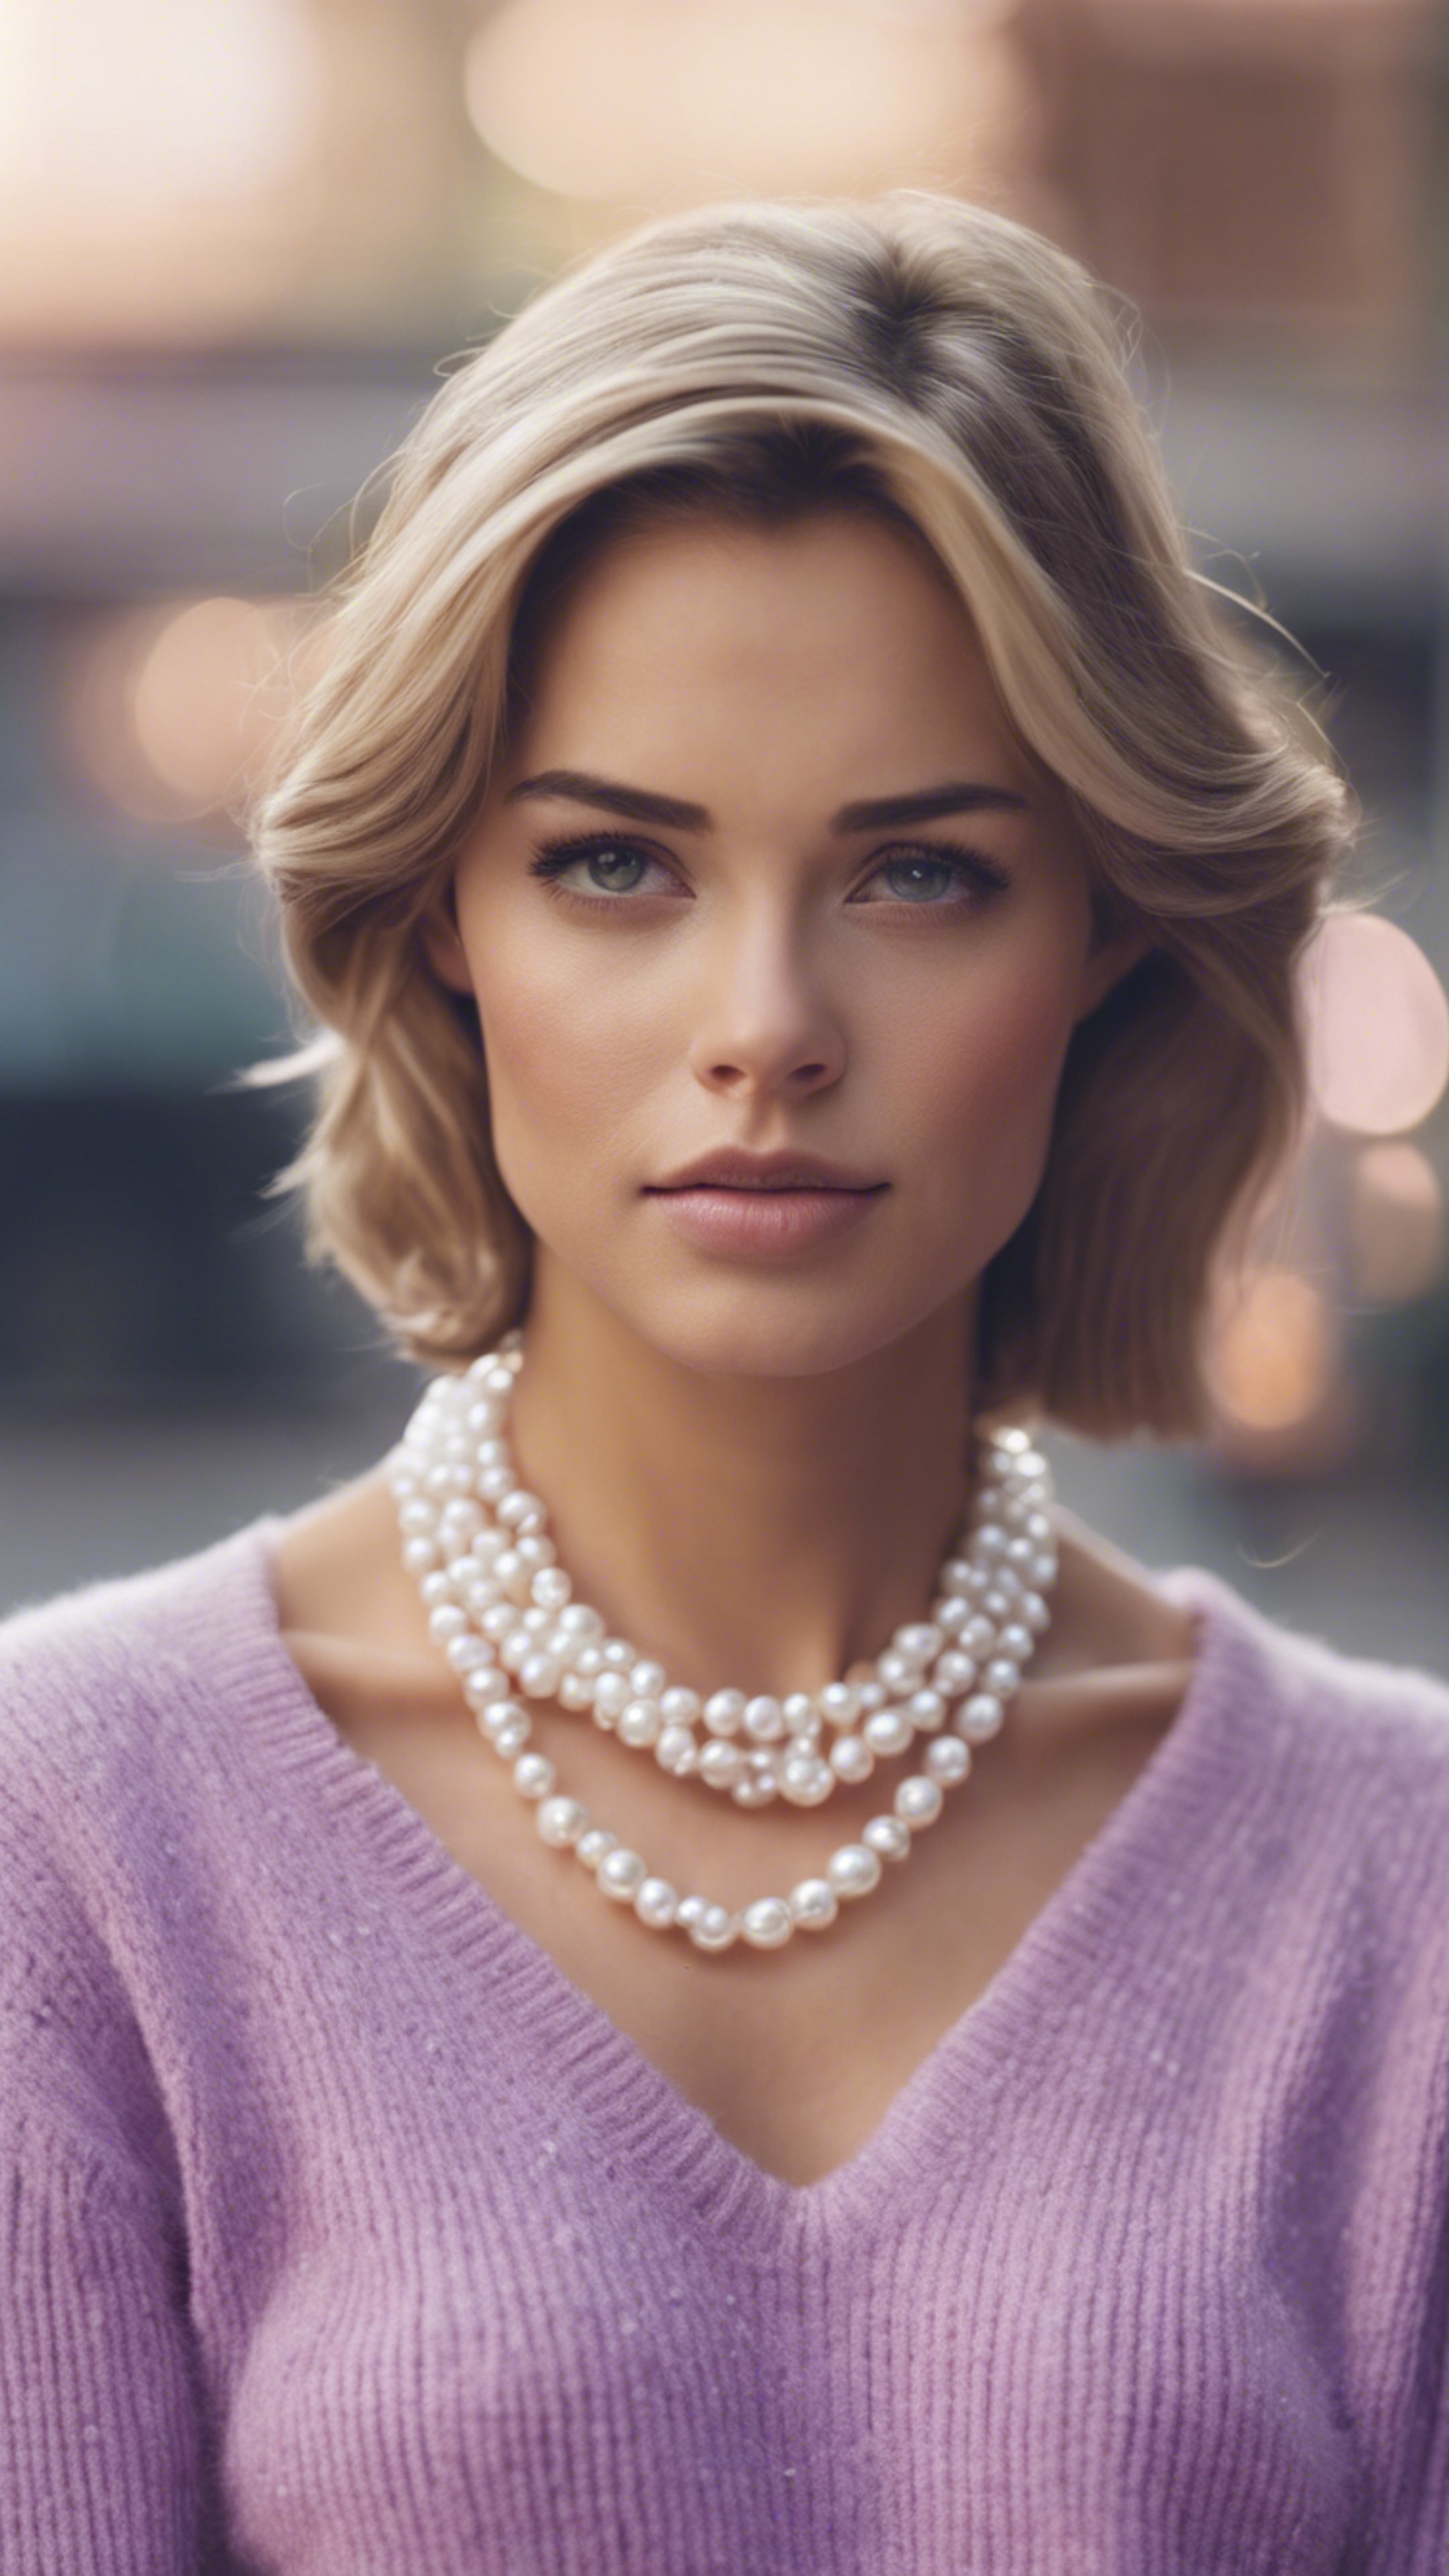 A stylish preppy woman wearing a pastel purple cashmere sweater and pearl necklace. Tapeet[eff5c75e56ed424daf90]